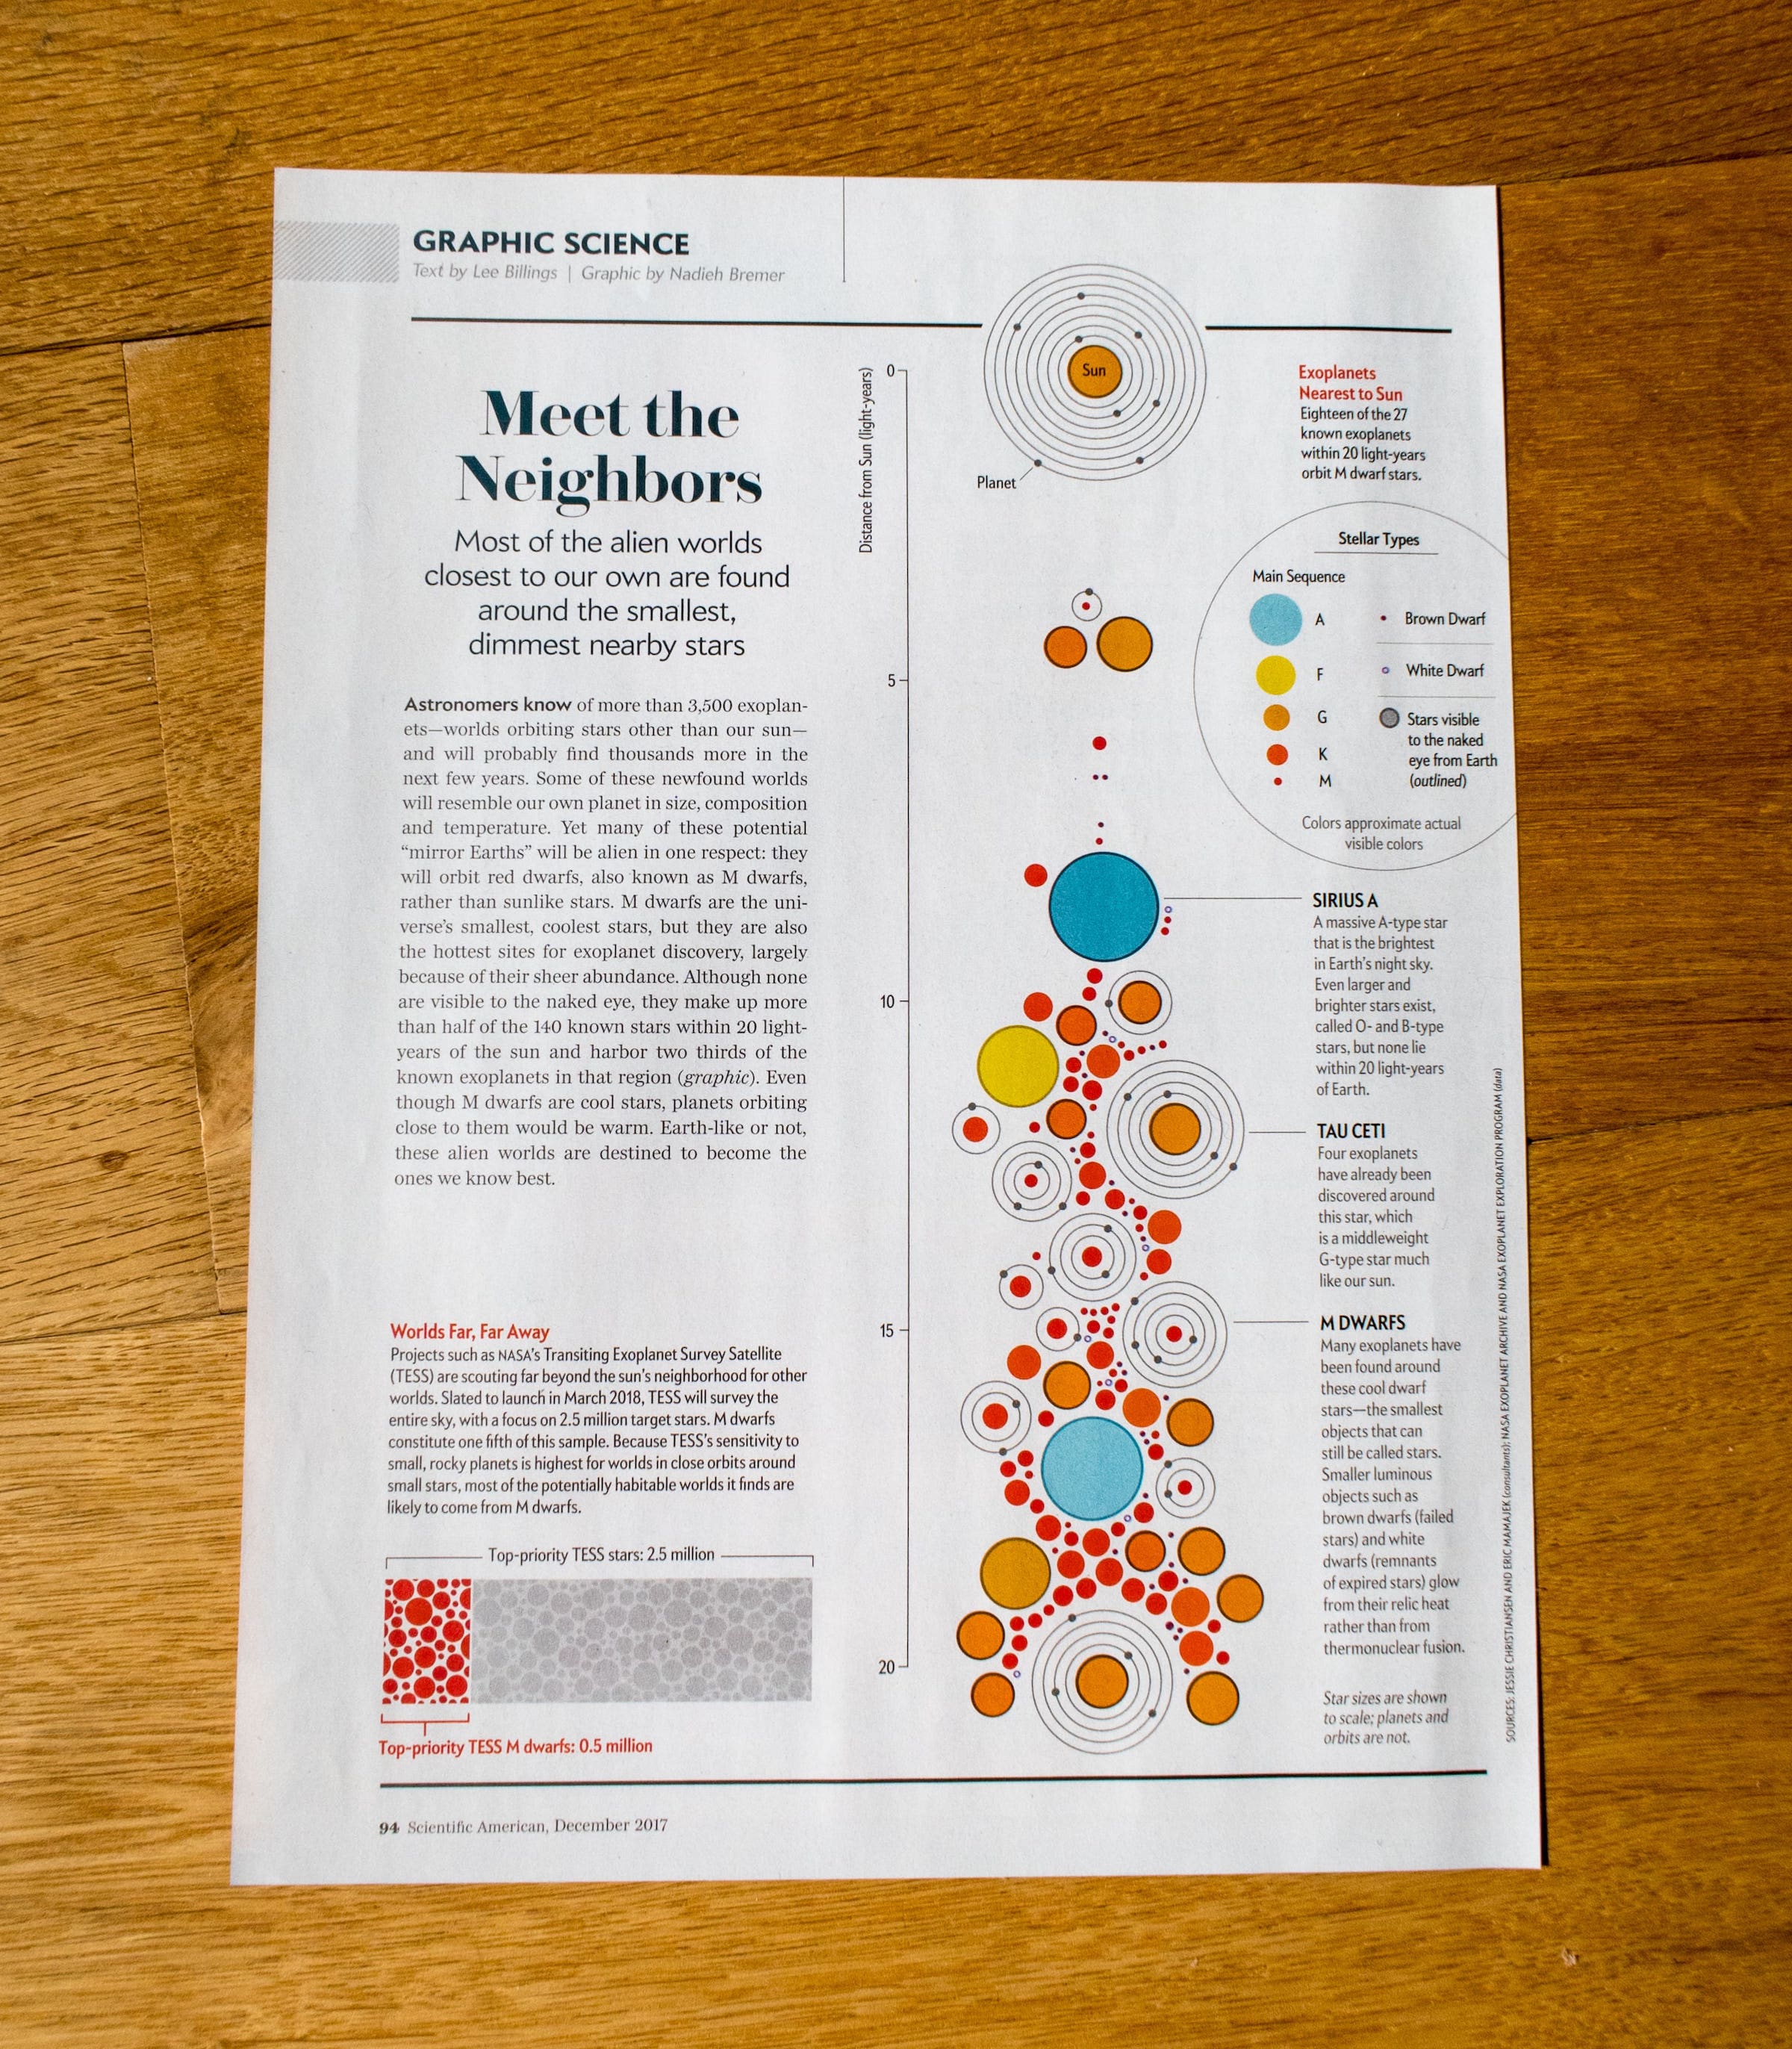 The full 'Graphic Science' page in the December edition of the Scientific American